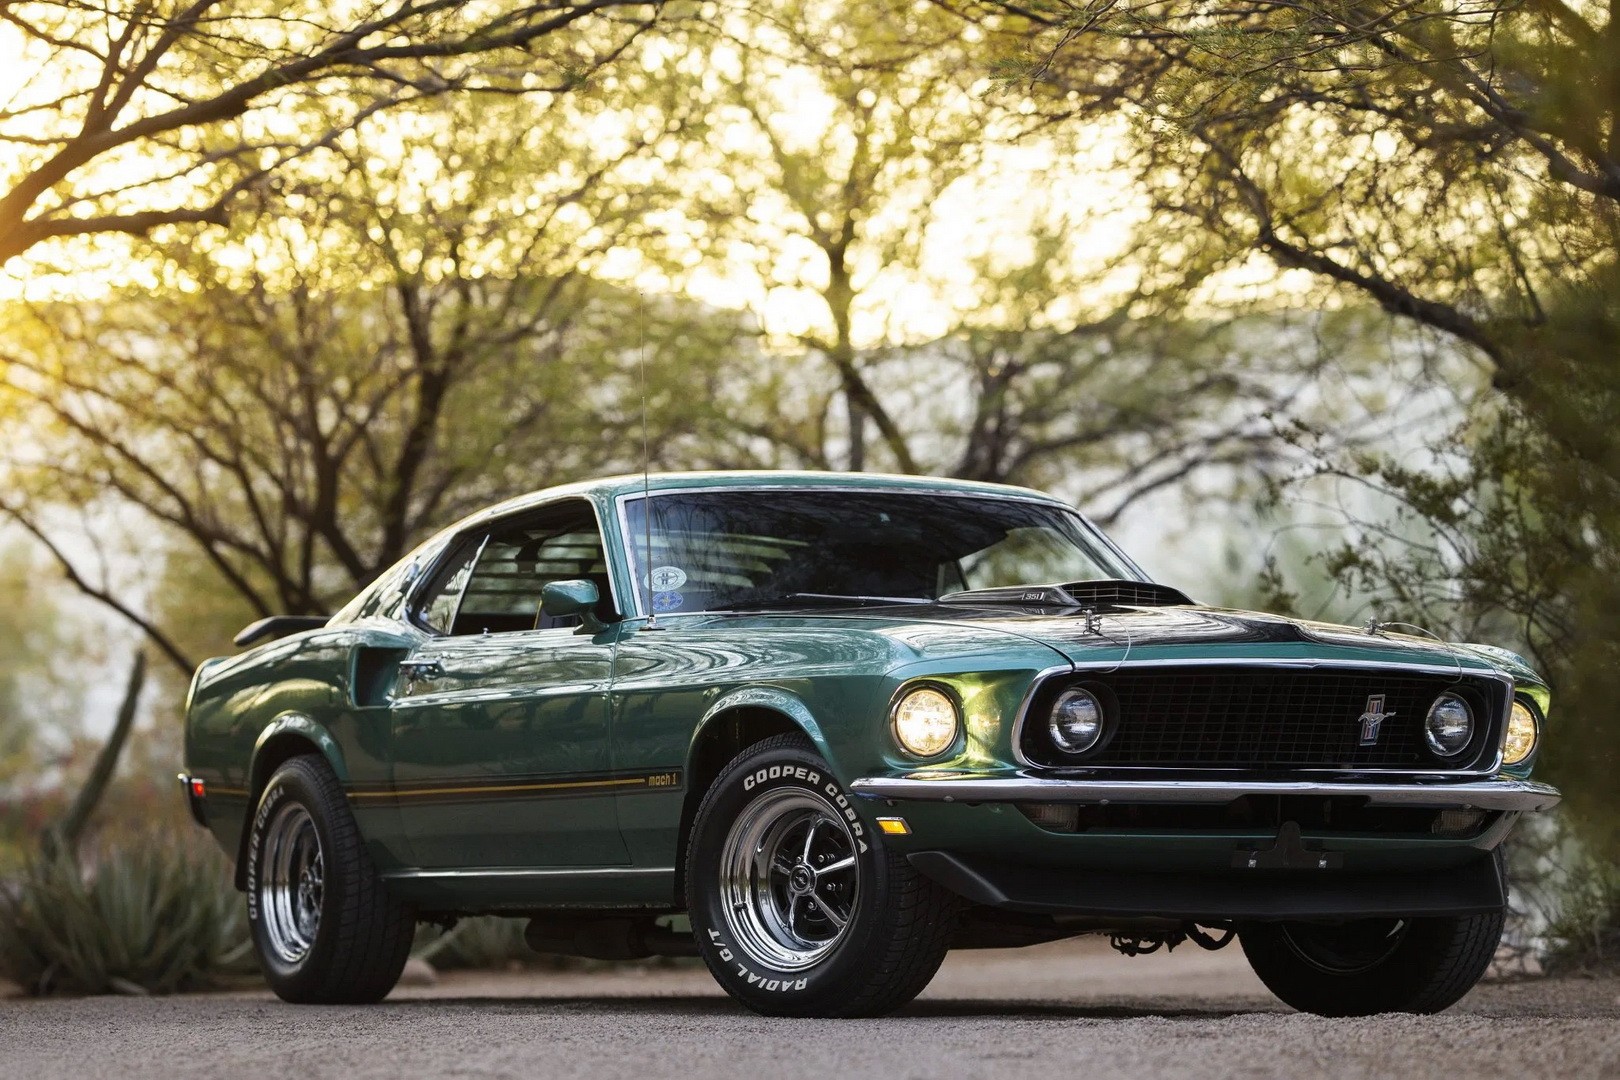 1969 Mustang Mach 1 Goes Under the Knife, Comes Out More Glorious Than ...